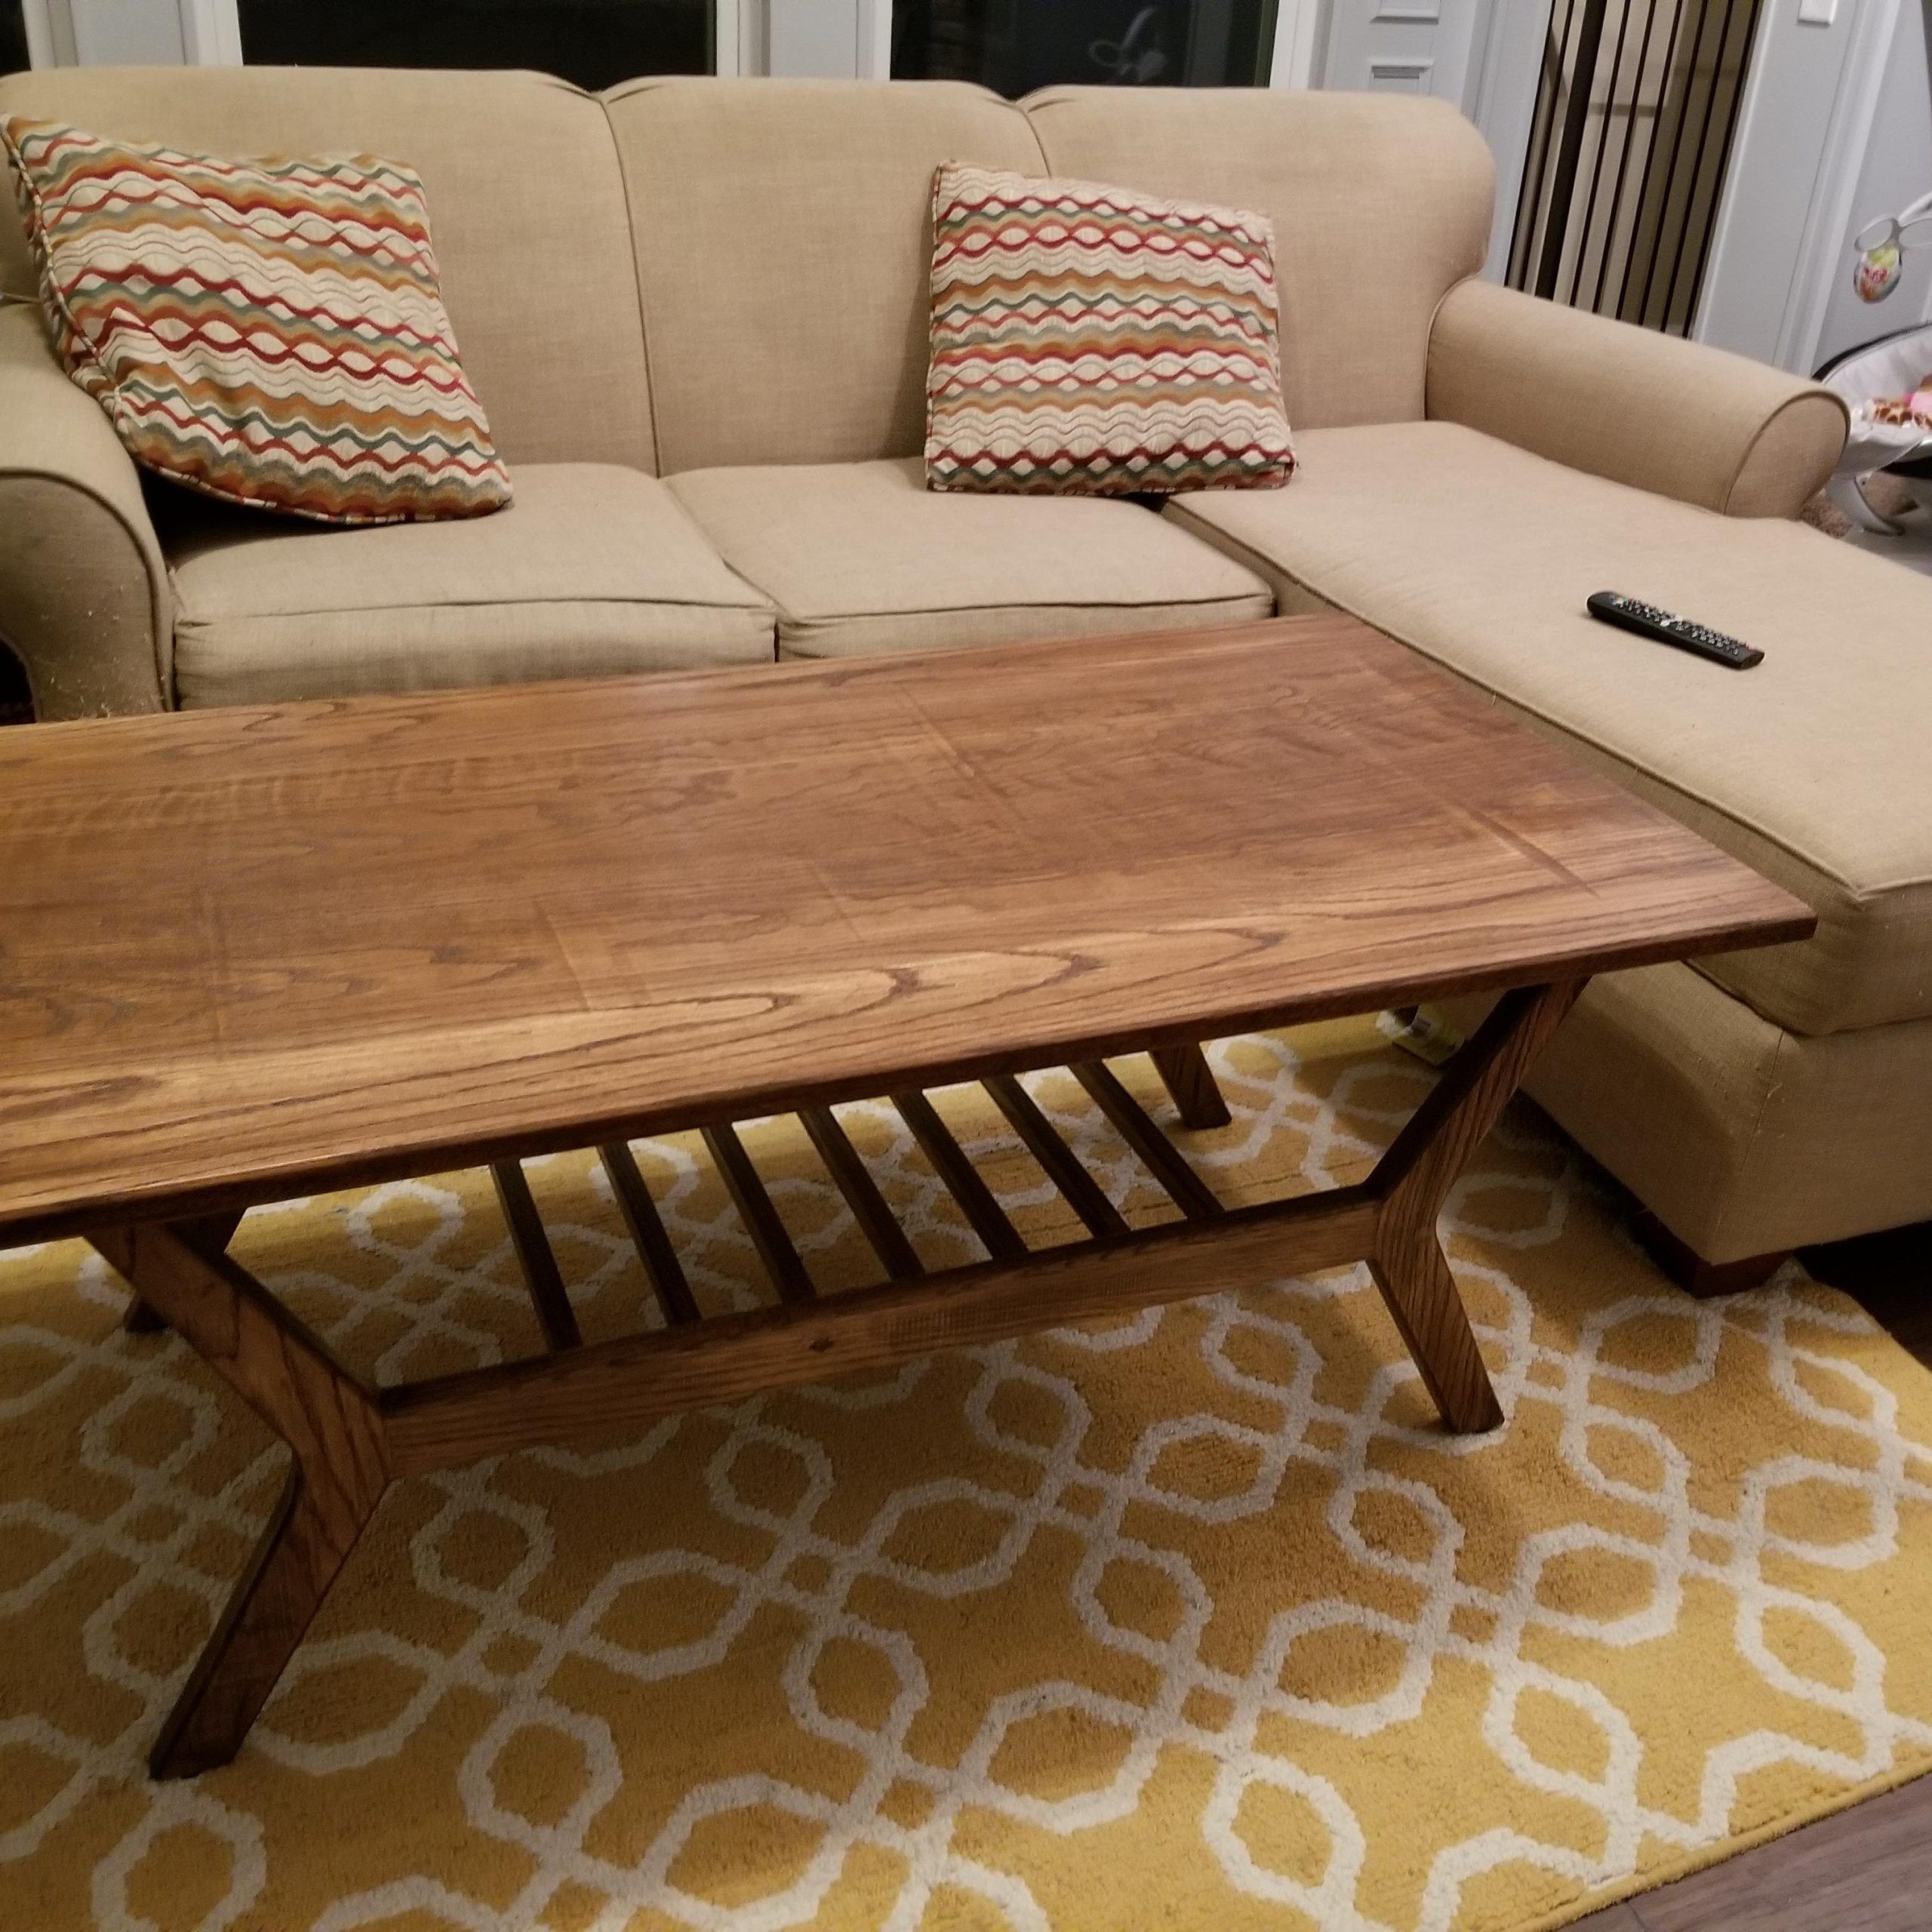 Red Oak Mid Century Modern Coffee Table. : R/woodworking With Mid Century Modern Coffee Tables (Gallery 20 of 20)